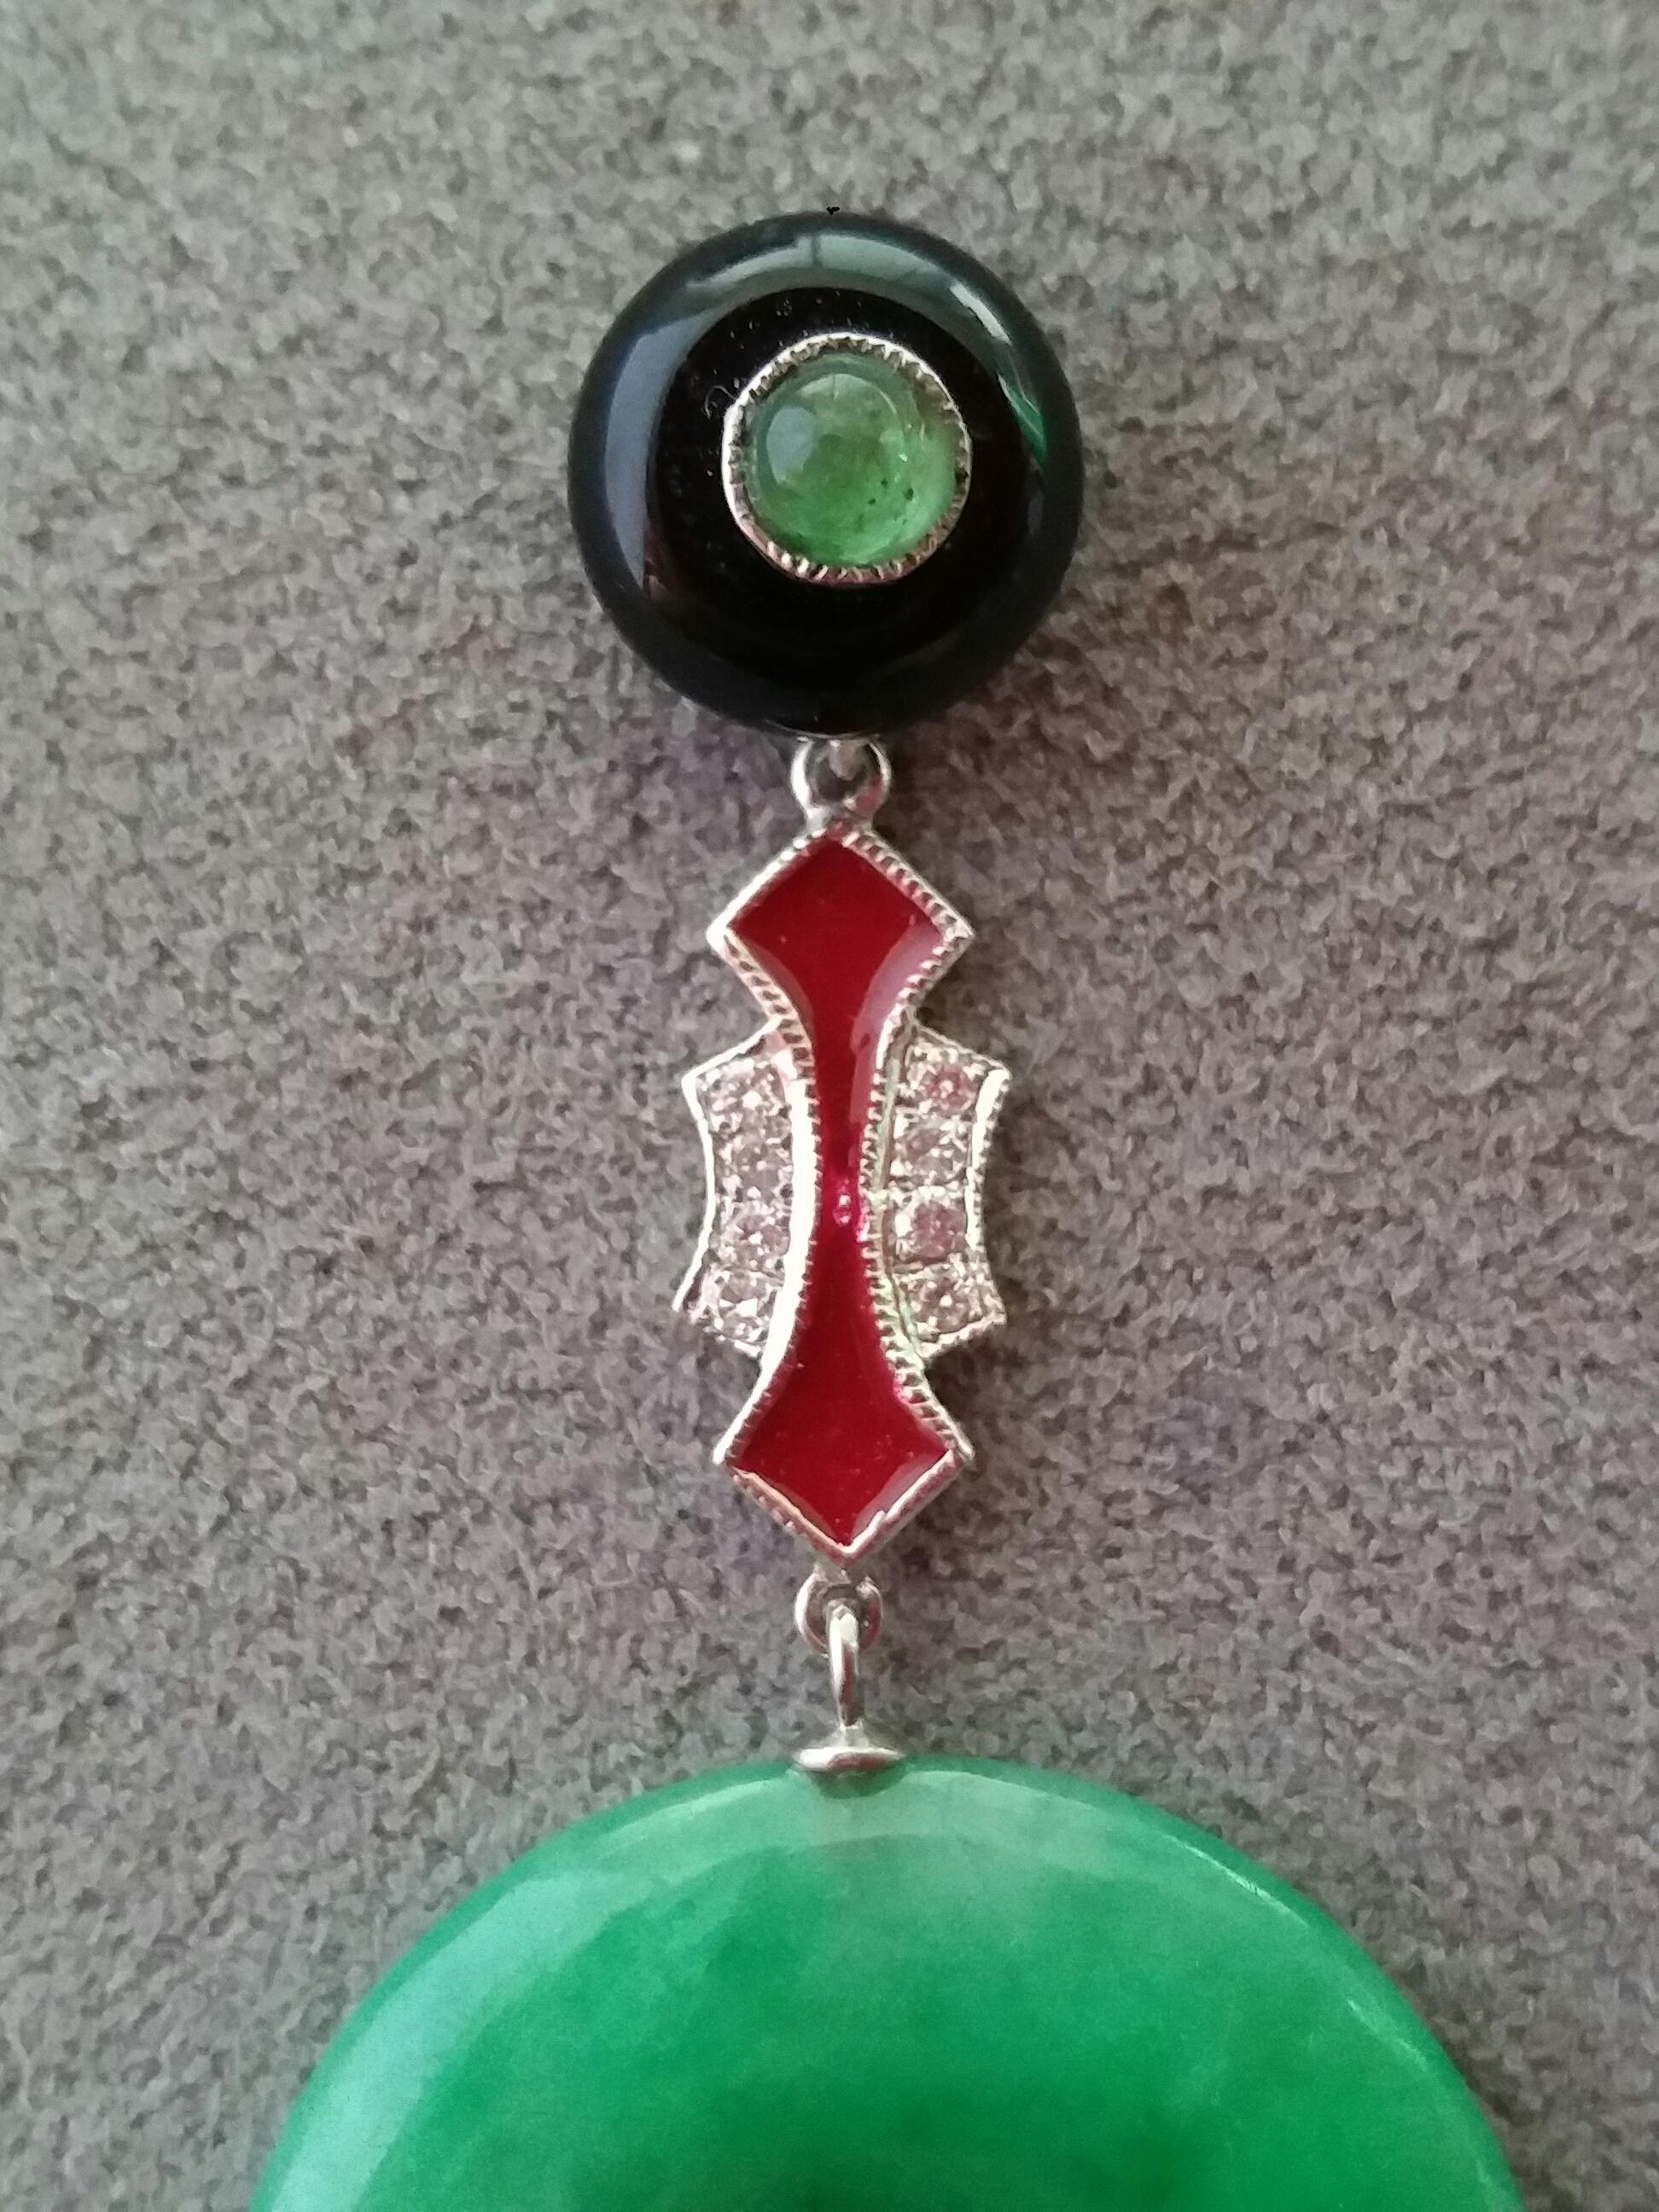 Tops are 2 round black onix of 10 mm in diameter with small emerald round cabochons in the center,middle part in white gold,small full cut diamonds and red enamel,the bottom parts are 2 Jade donuts
Length 47 mm
Width 21 mm
Weight 8 grams
In 1978 our